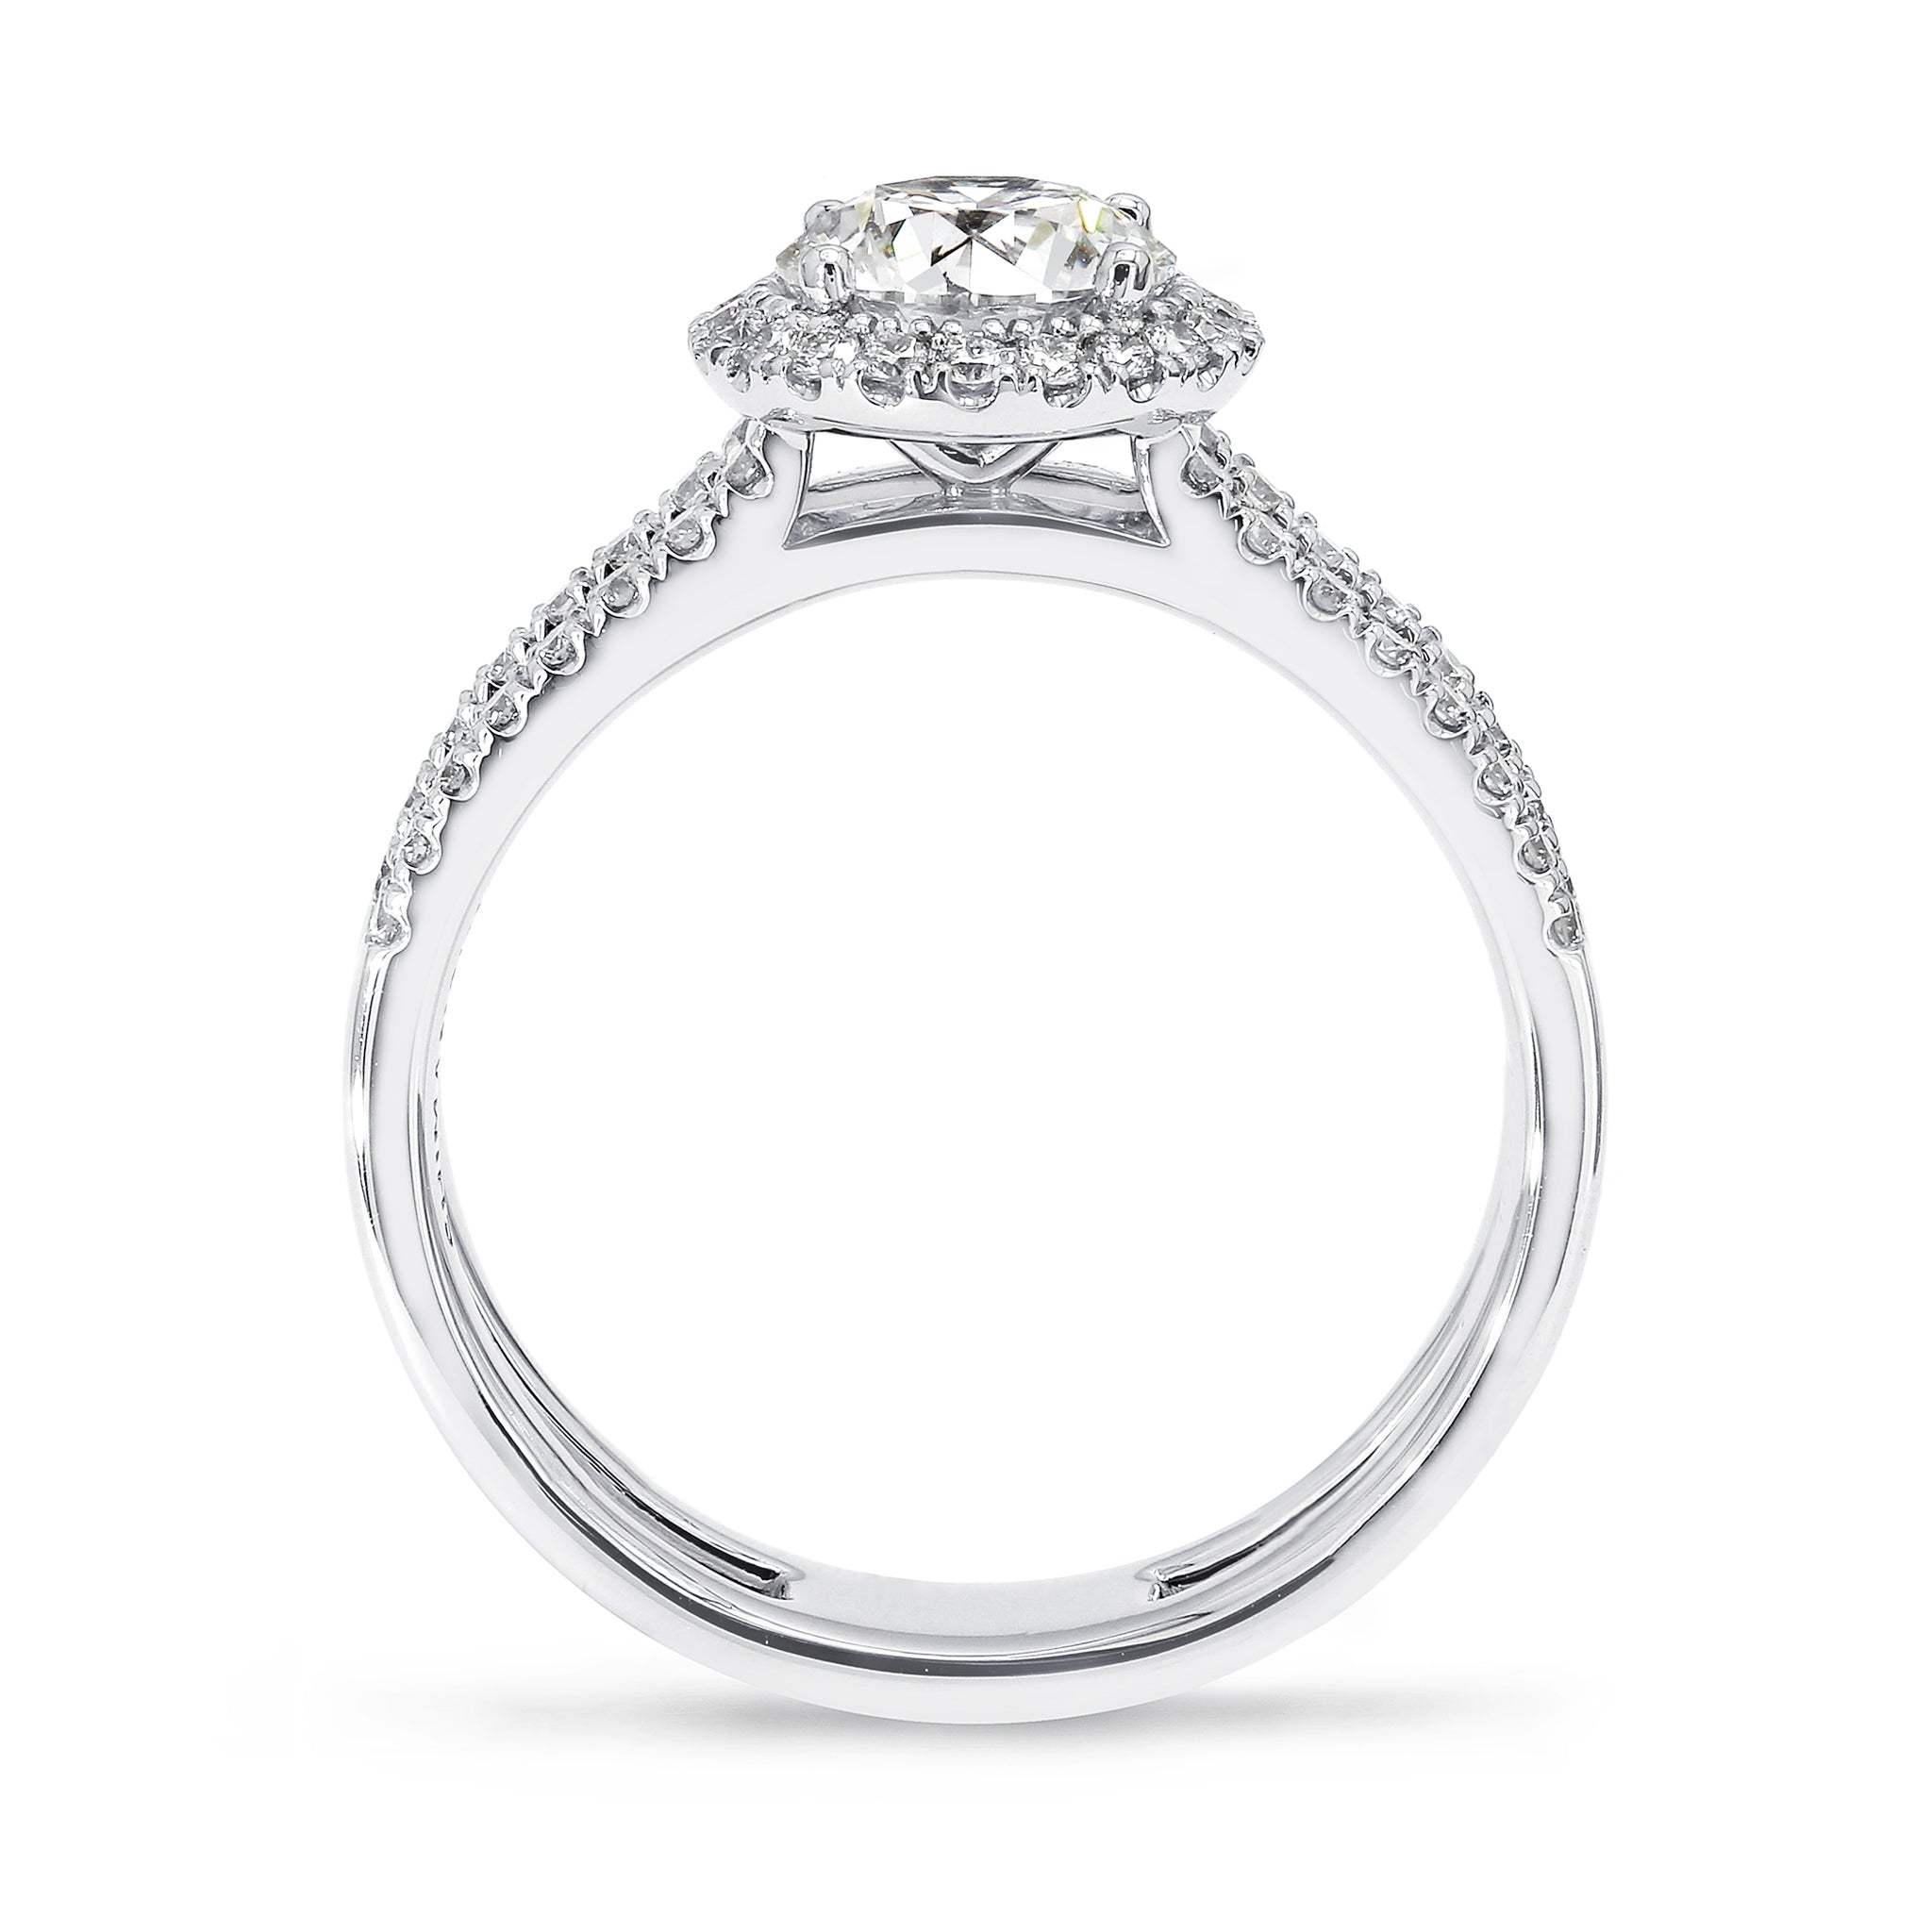 Shimansky - Diamond Microset Double Band Halo Ring 1.00ct crafted in 18K White Gold